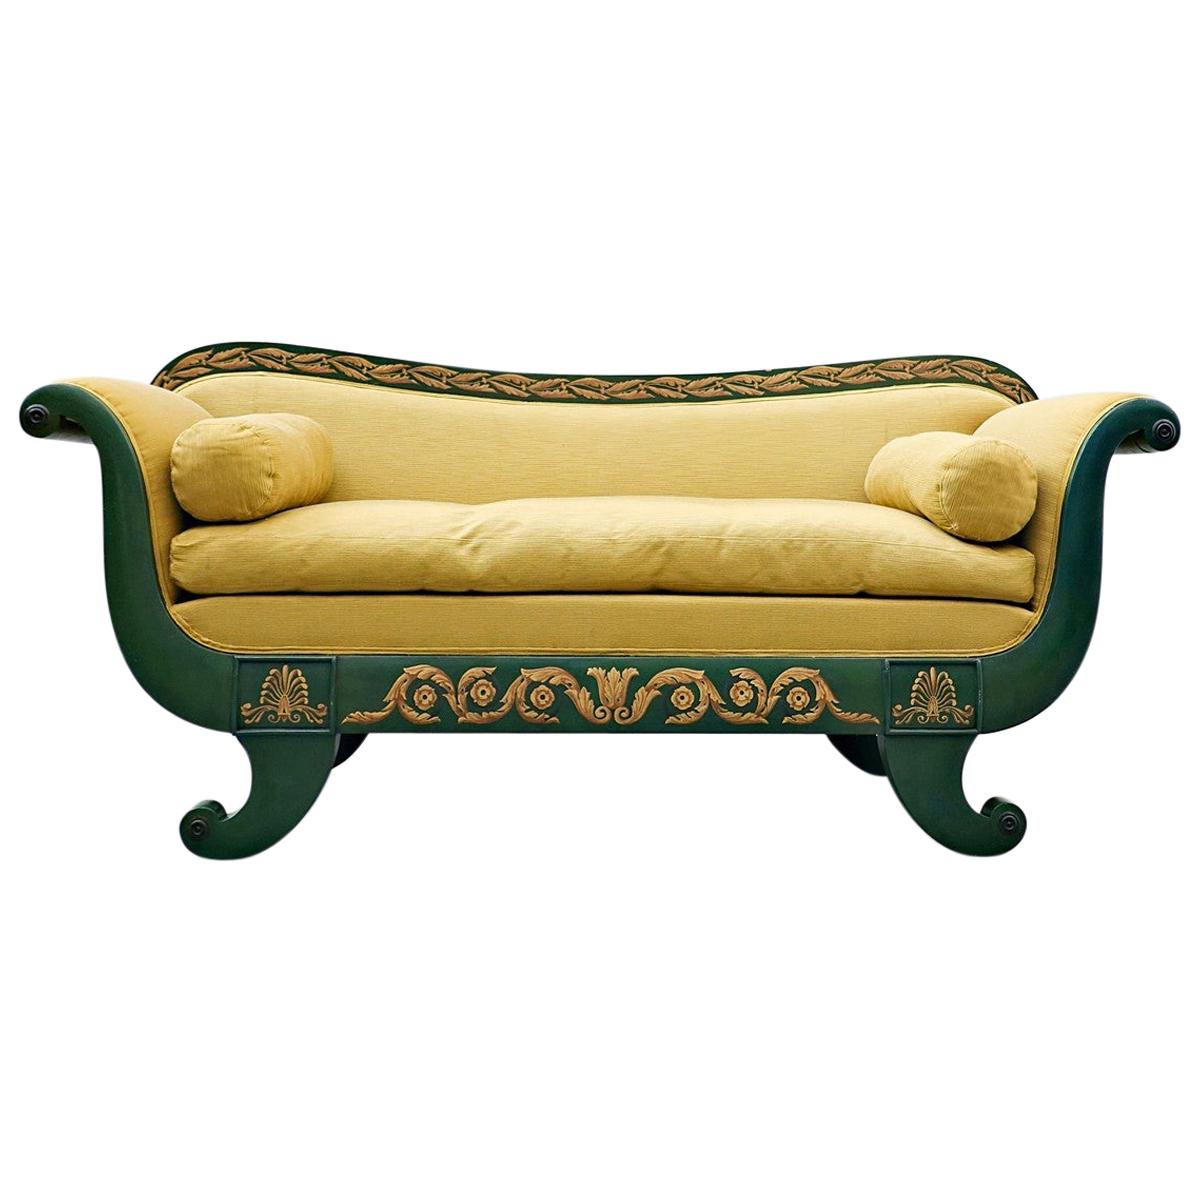 French Charles X Sofa, Green and Gold Lacquered Wood